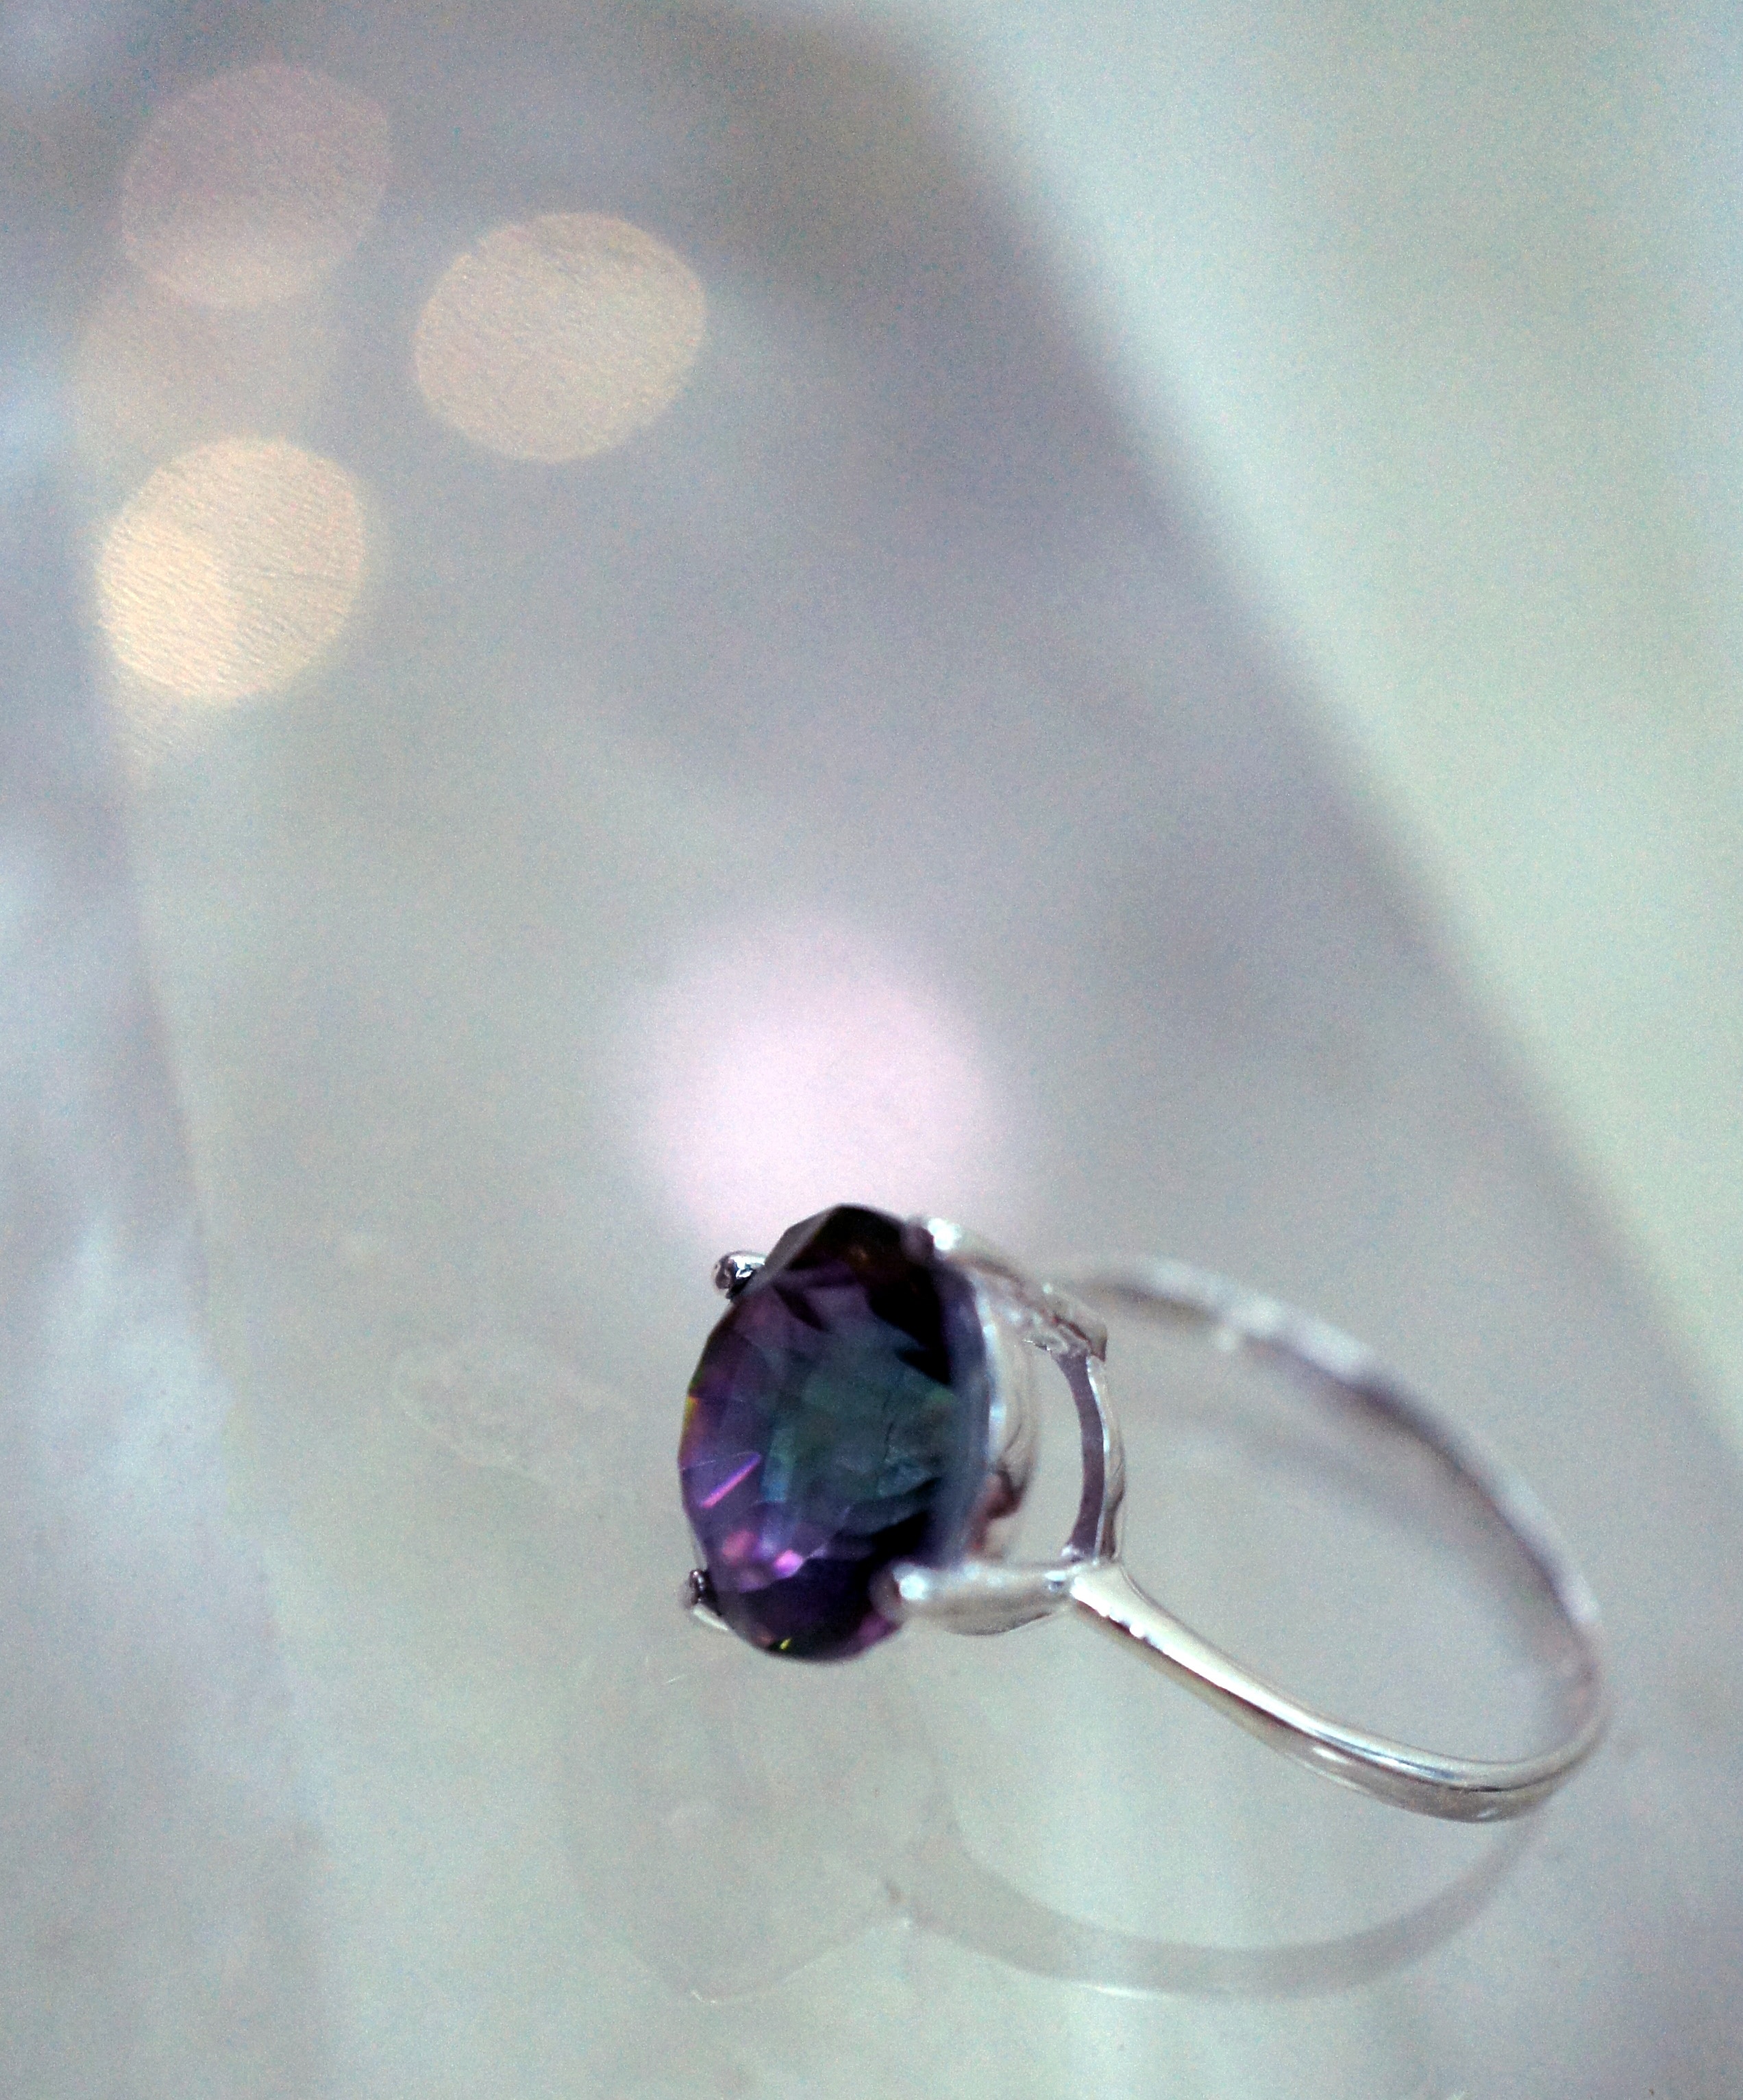 silver and blue gemstone ring on white surface